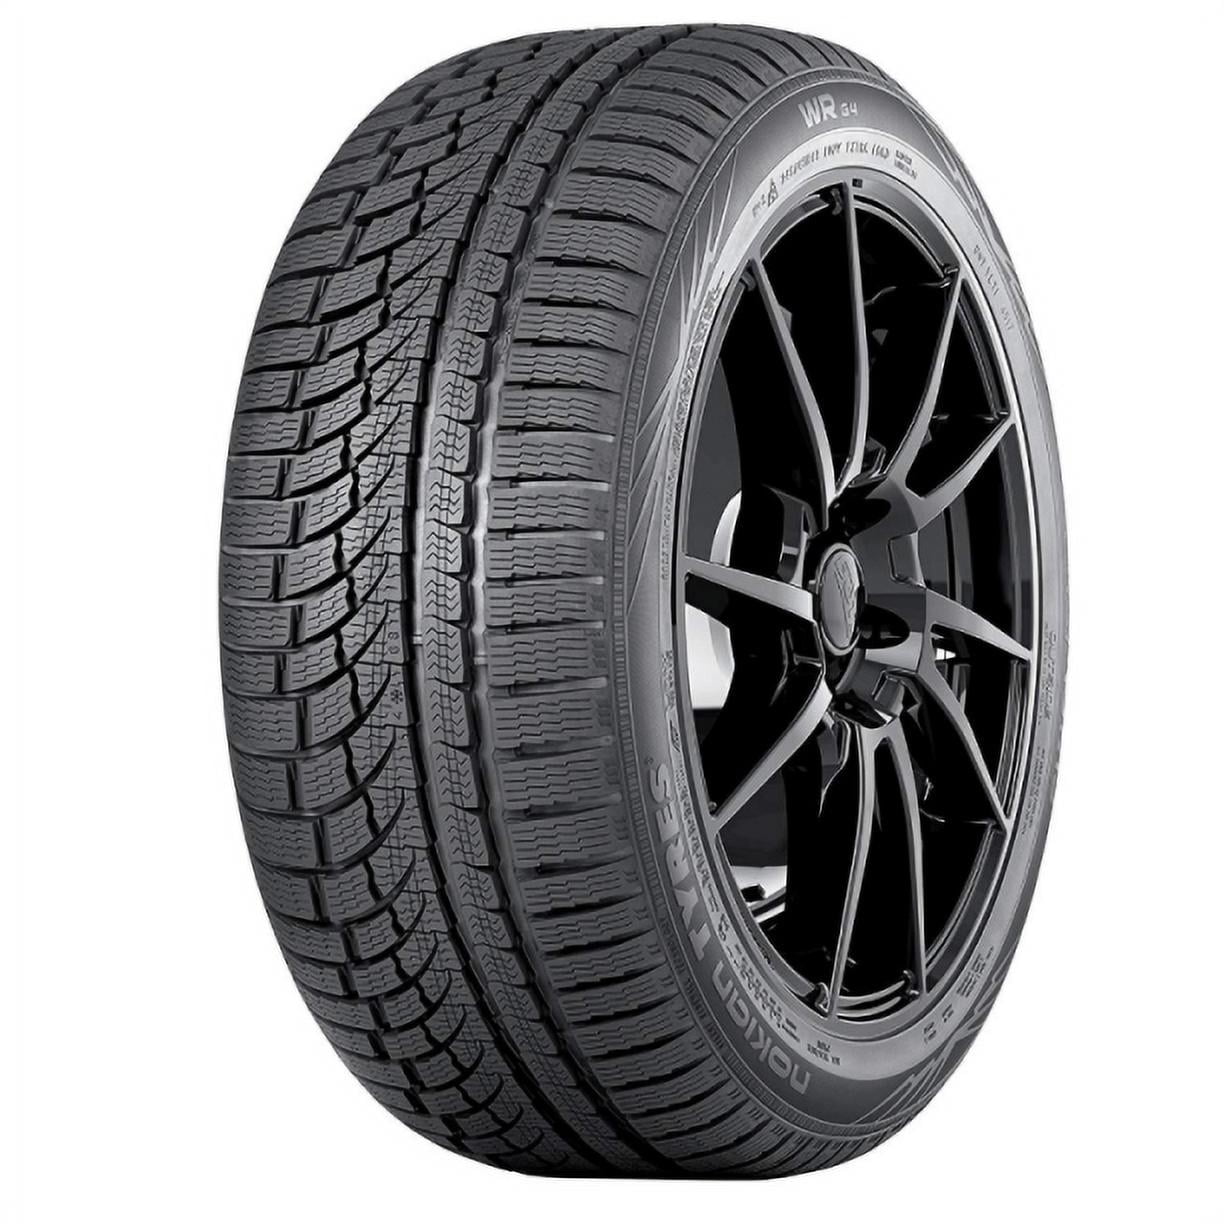 Nokian WR G4 SUV All Weather 225/65R17 SUV/Crossover XL Tire 106H